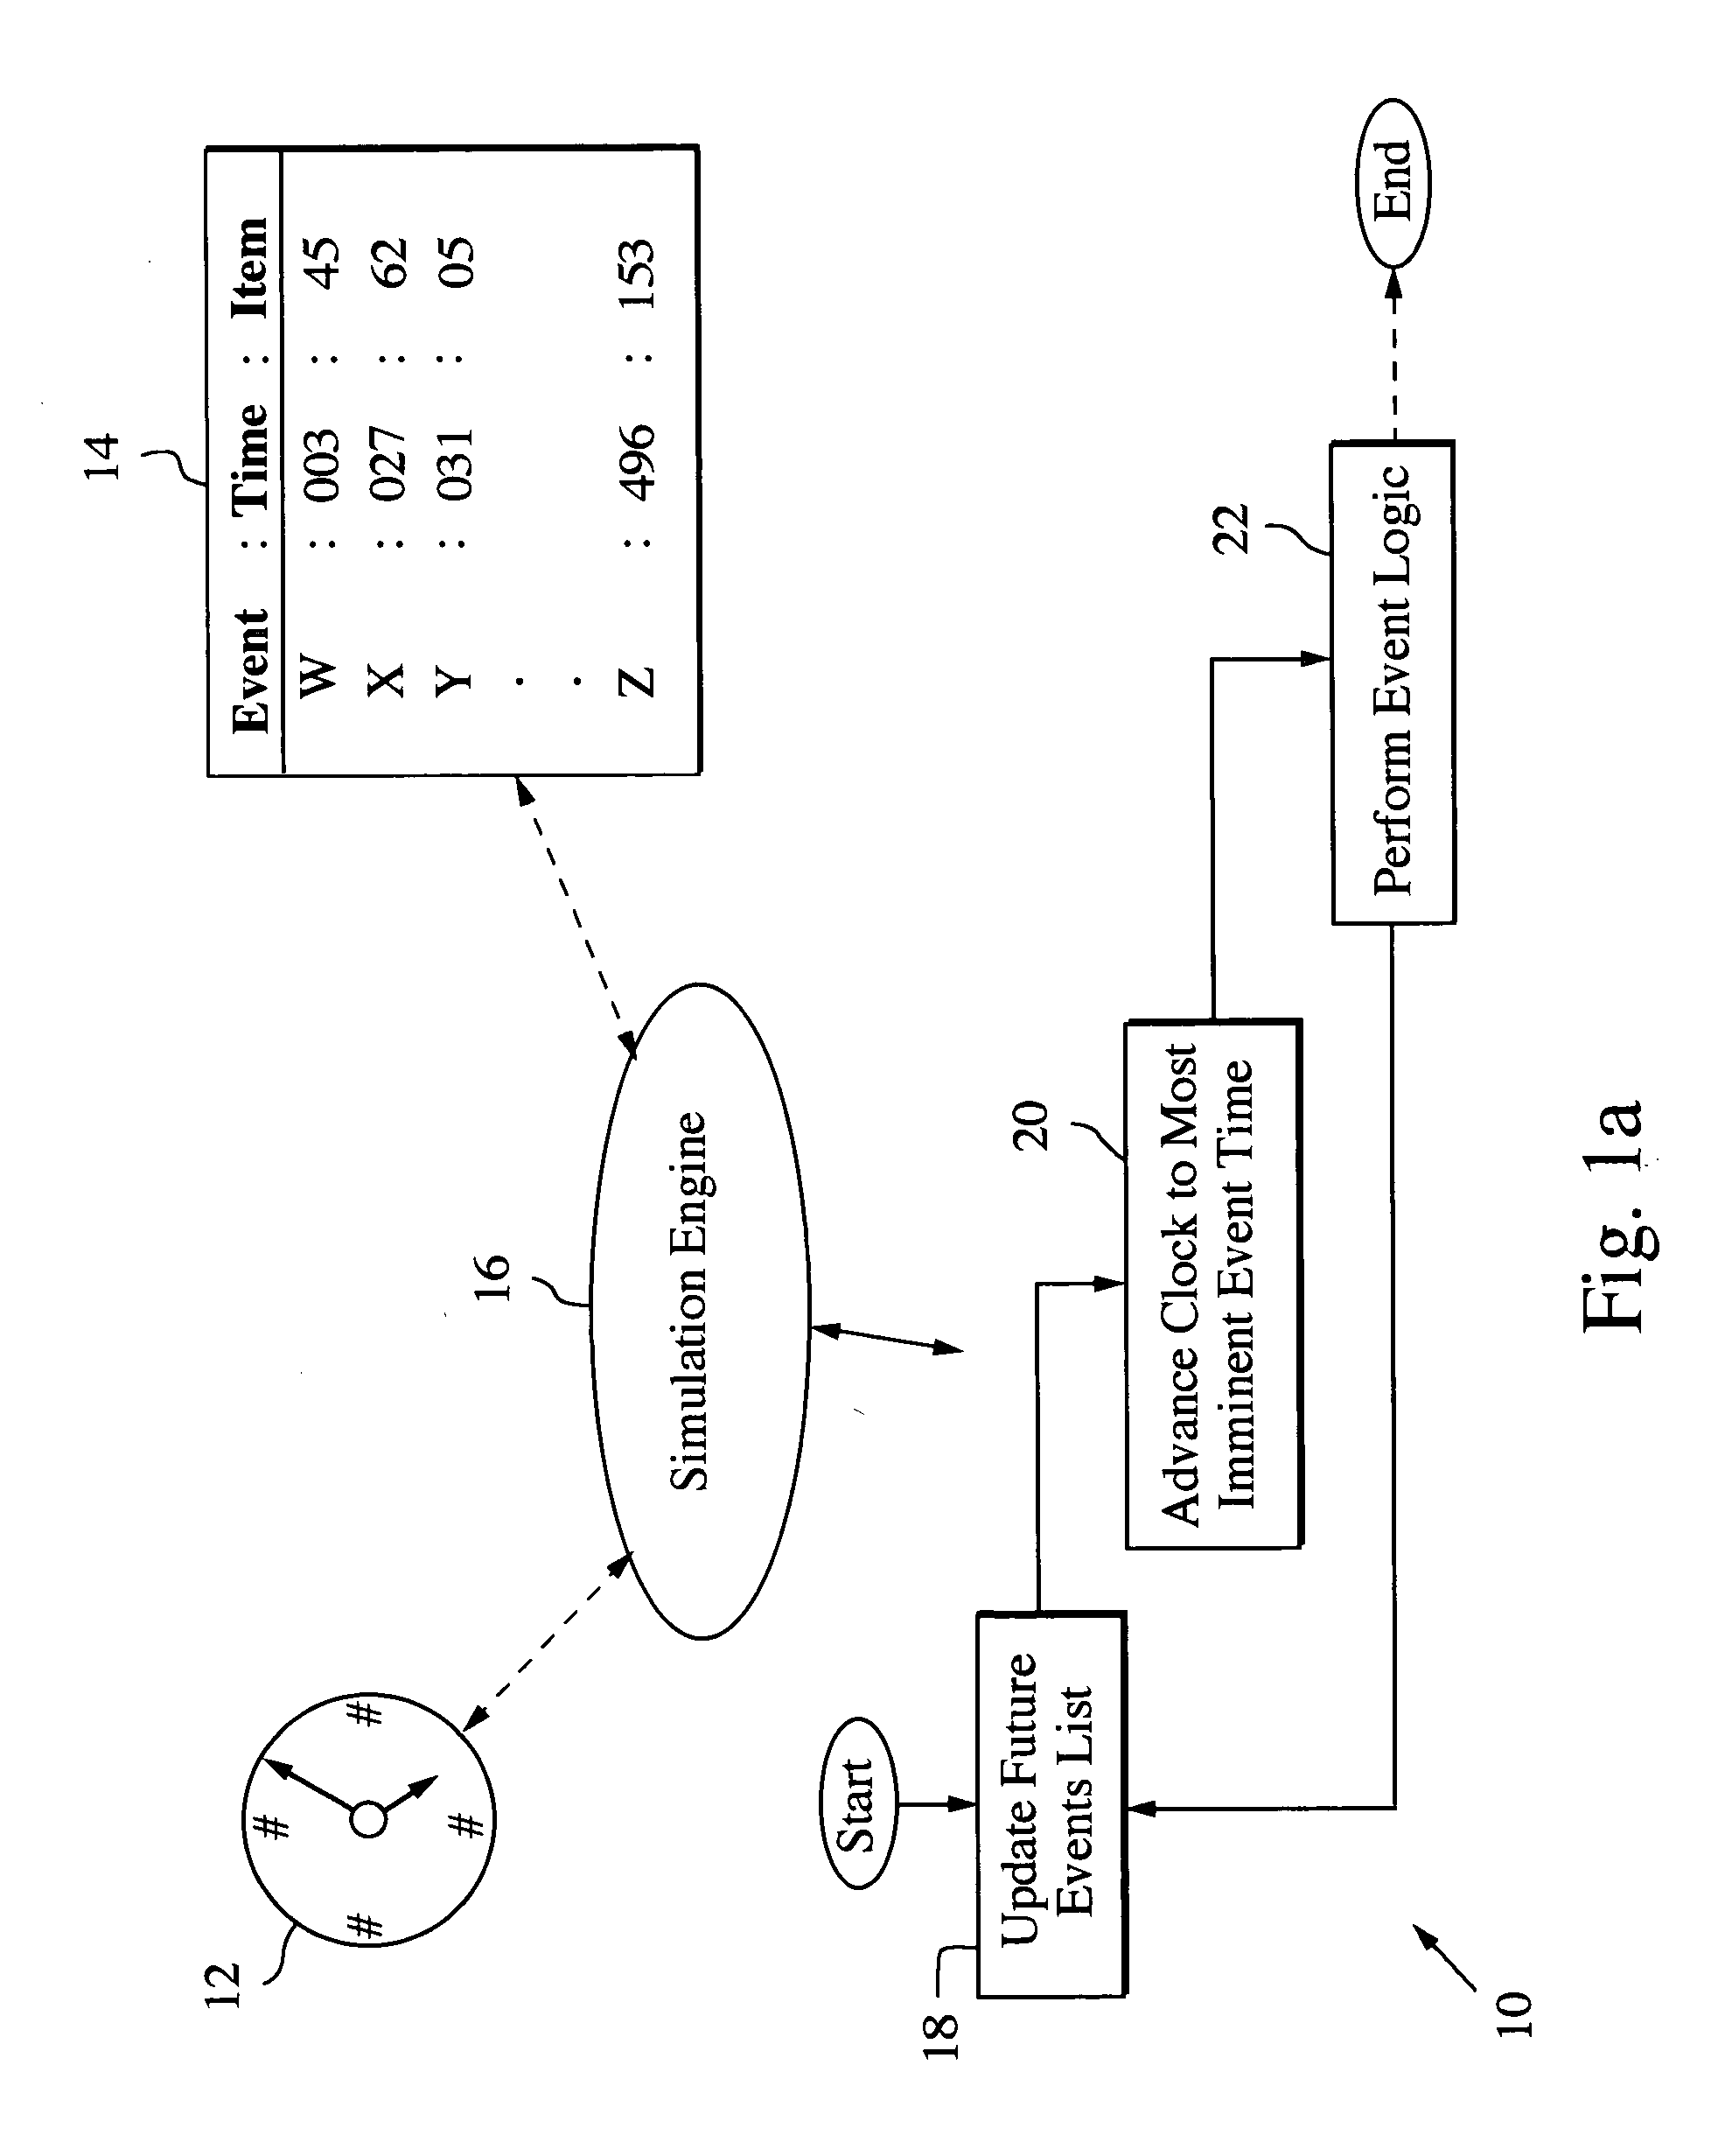 Operations and support discrete event simulation system and method